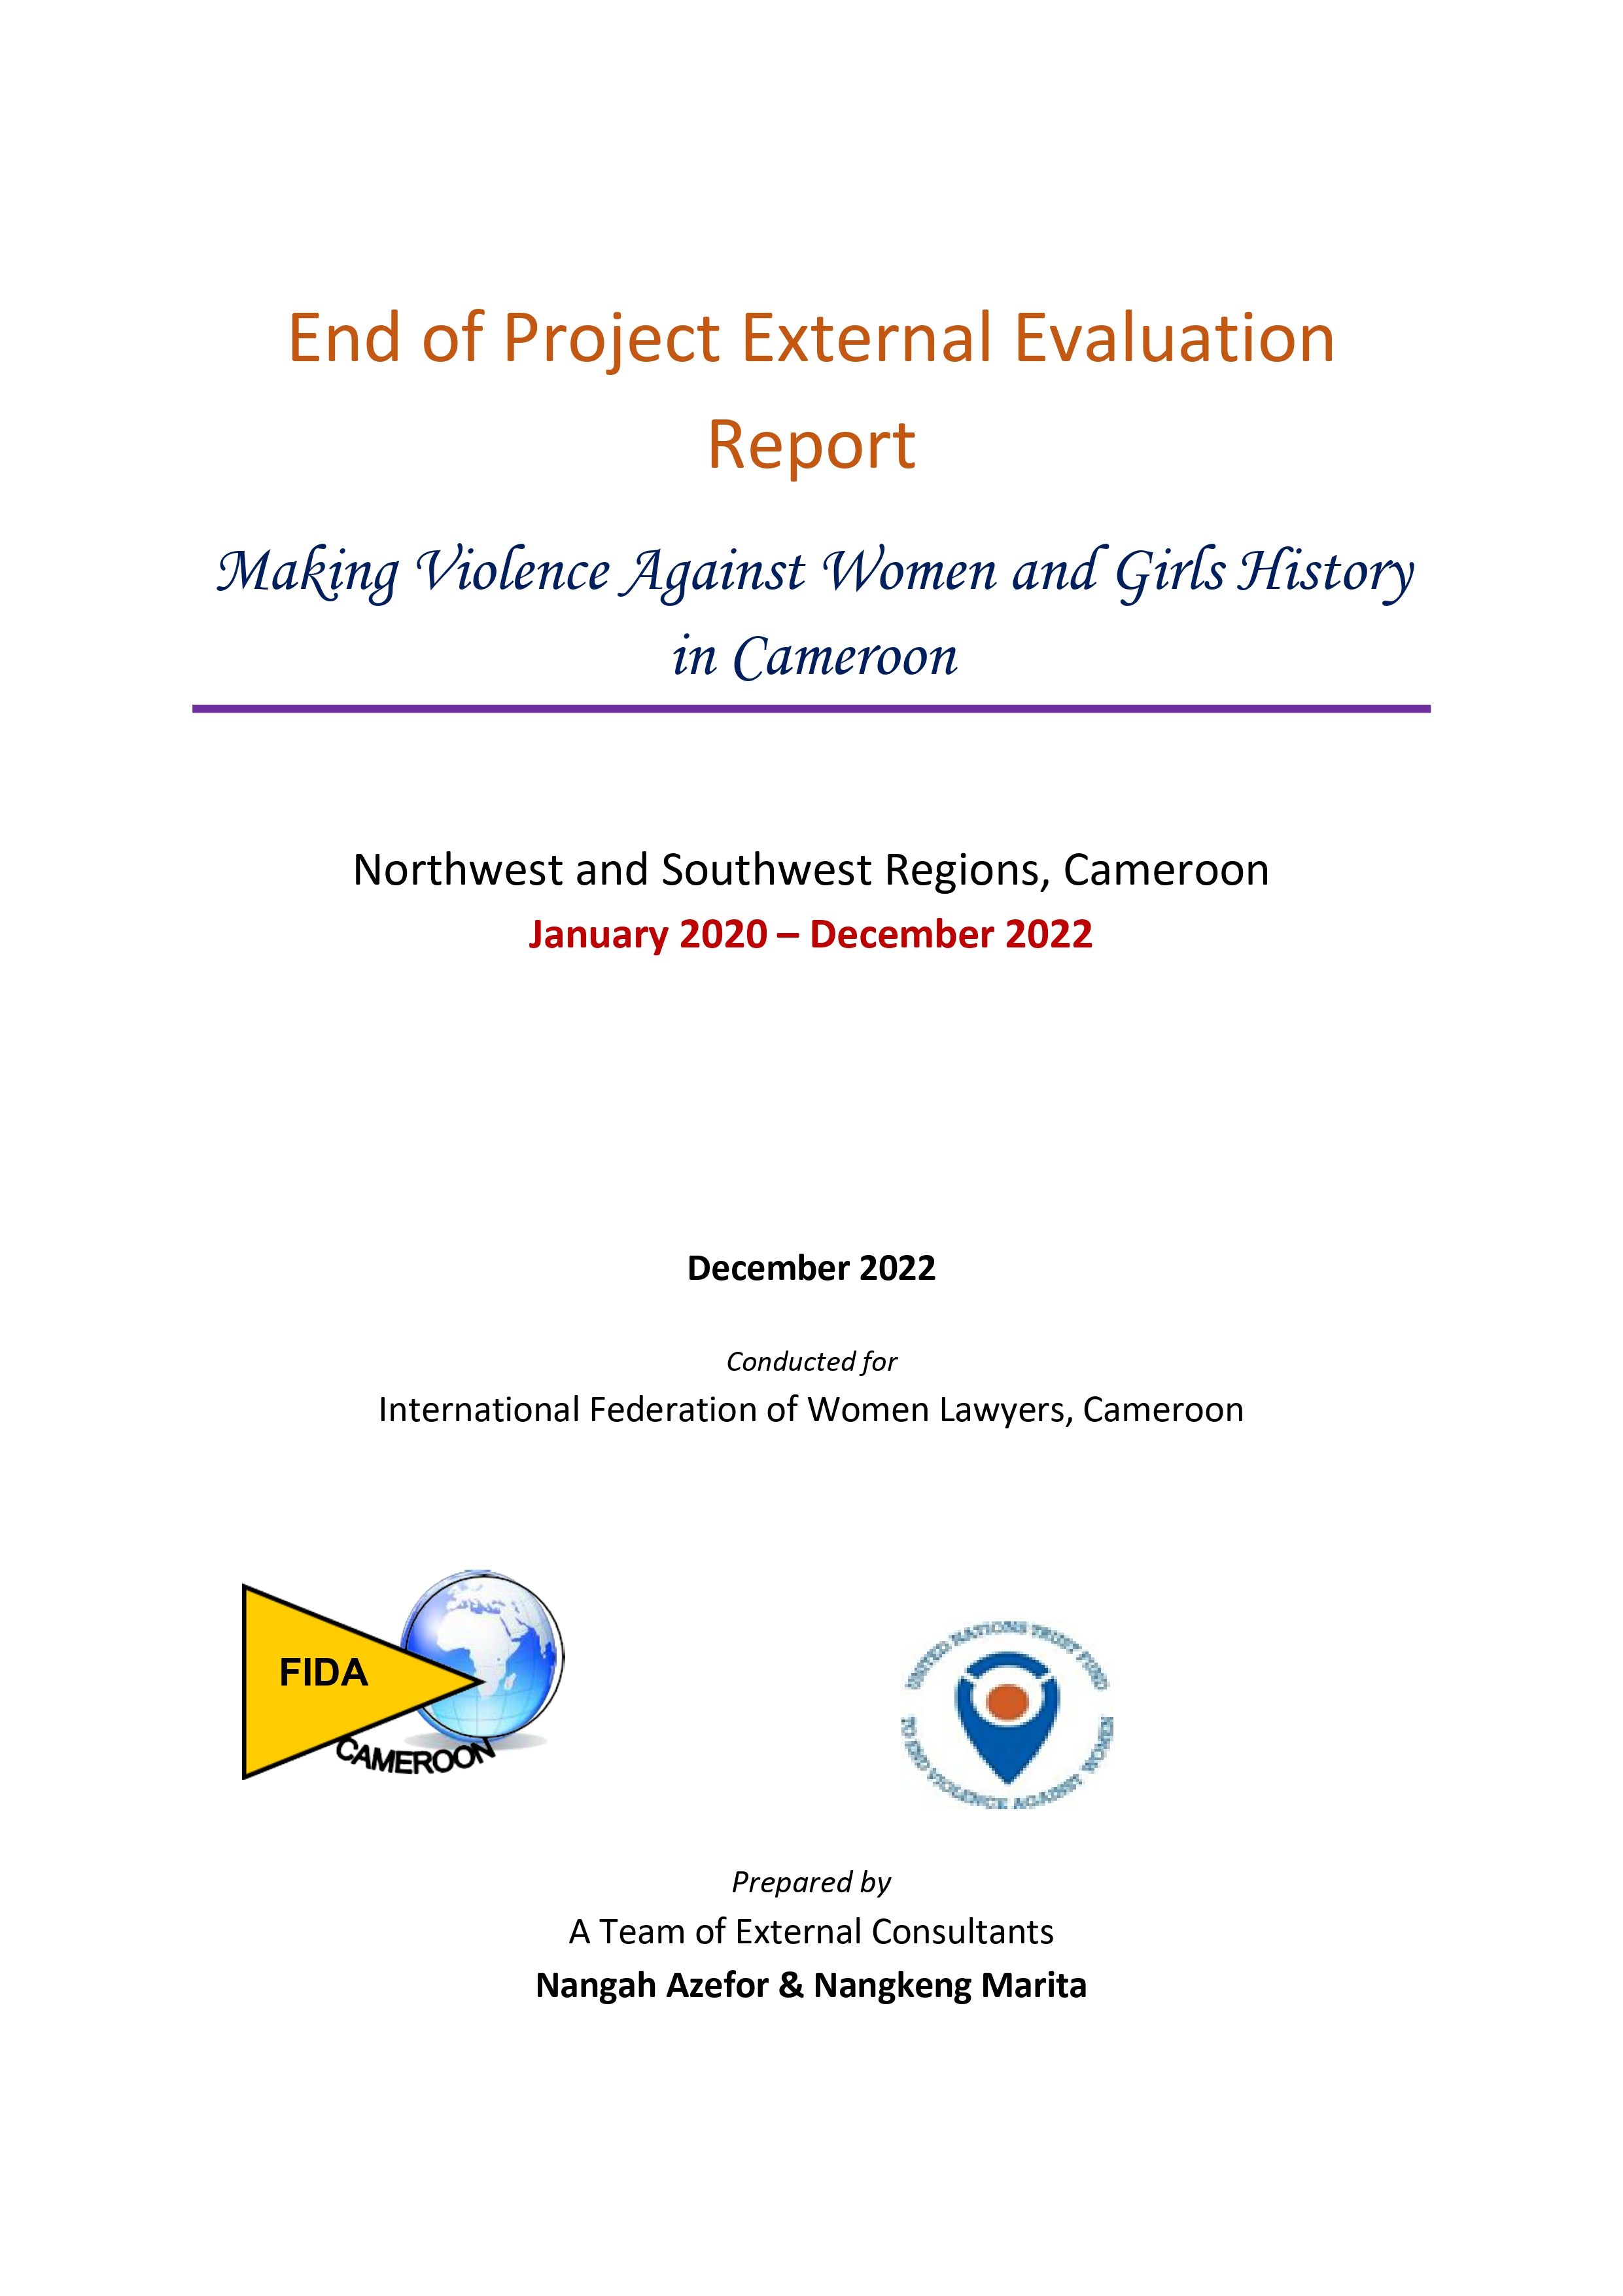 Final Evaluation: Making Violence Against Women and Girls History in the Northwest and Southwest Regions of Cameroon 